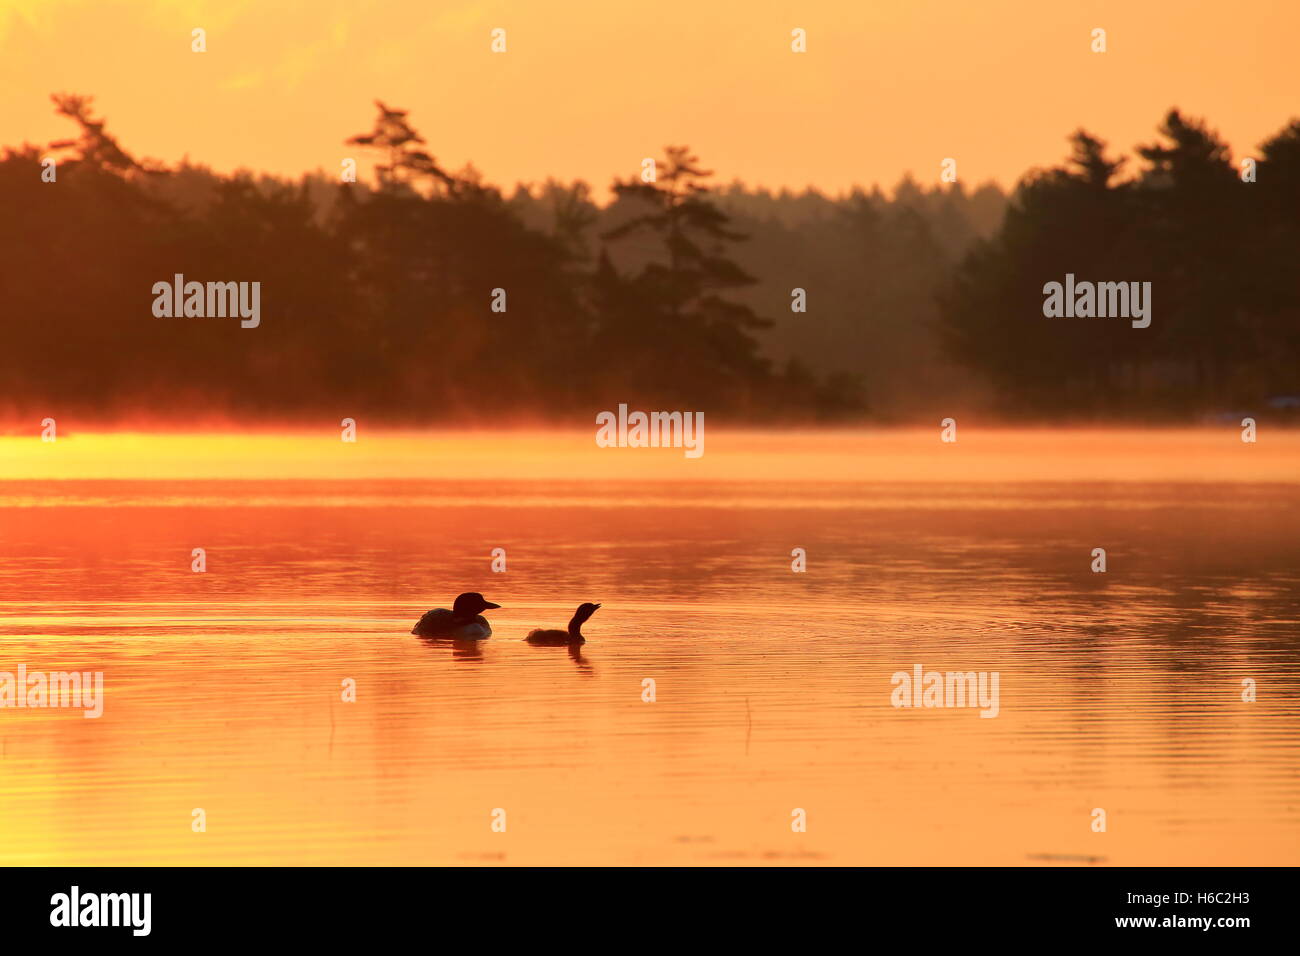 A common Loon and baby on a misty lake at sunrise in Canada Stock Photo